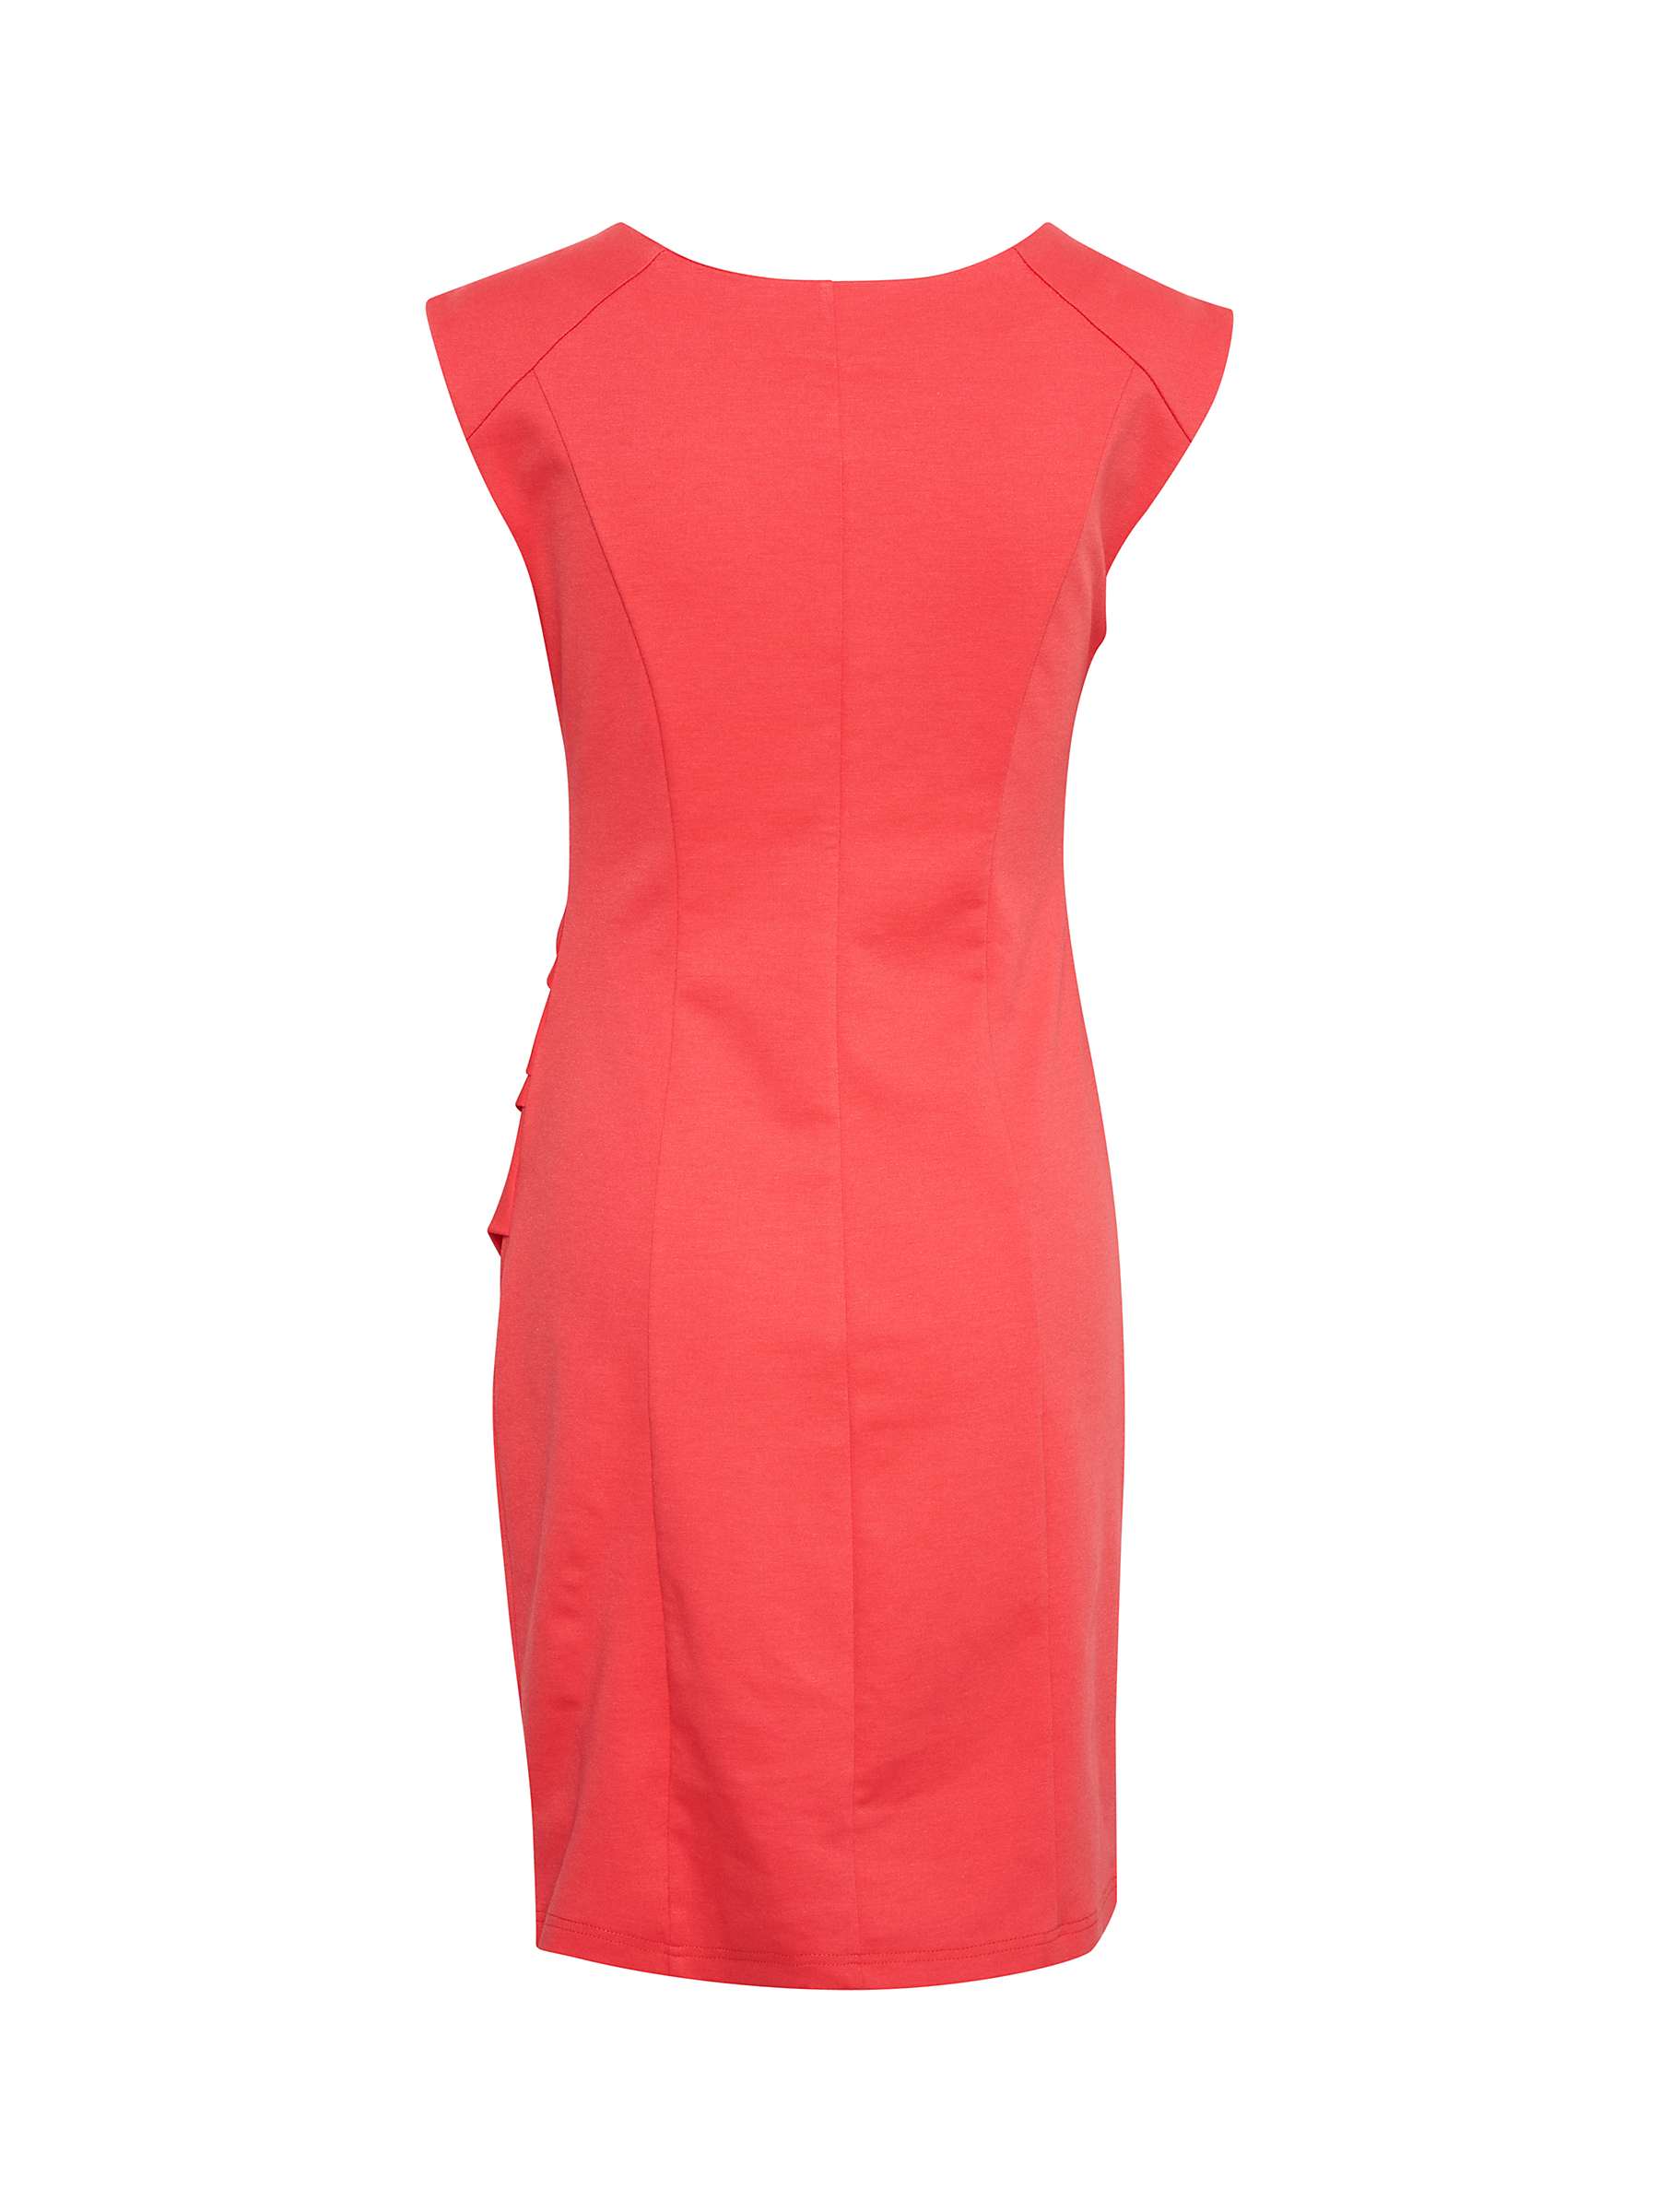 Buy KAFFE India Cocktail Sleeveless Fitted Dress Online at johnlewis.com